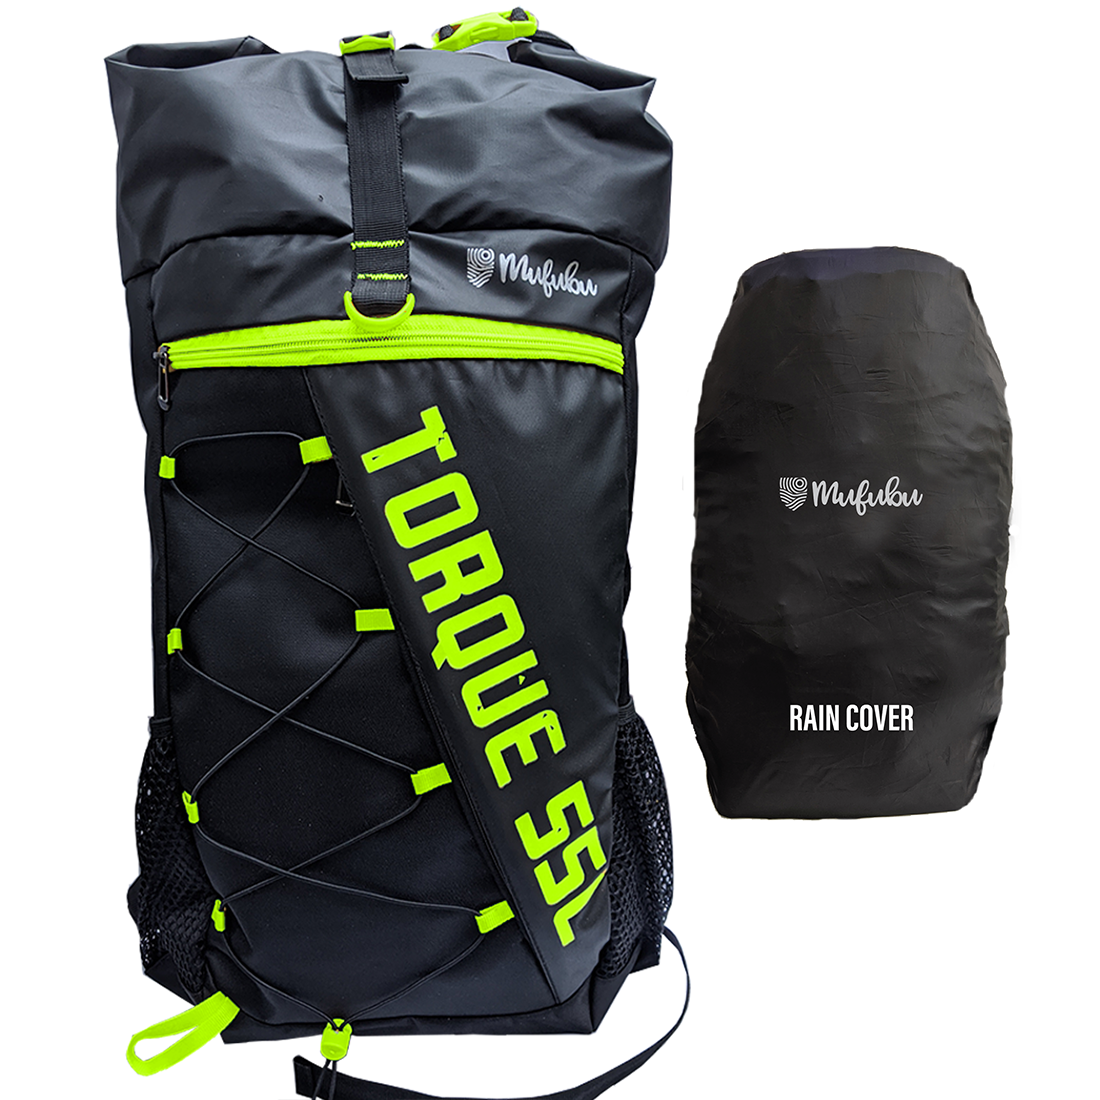 Torque 55 Ltr Green Rucksack with Rain Cover